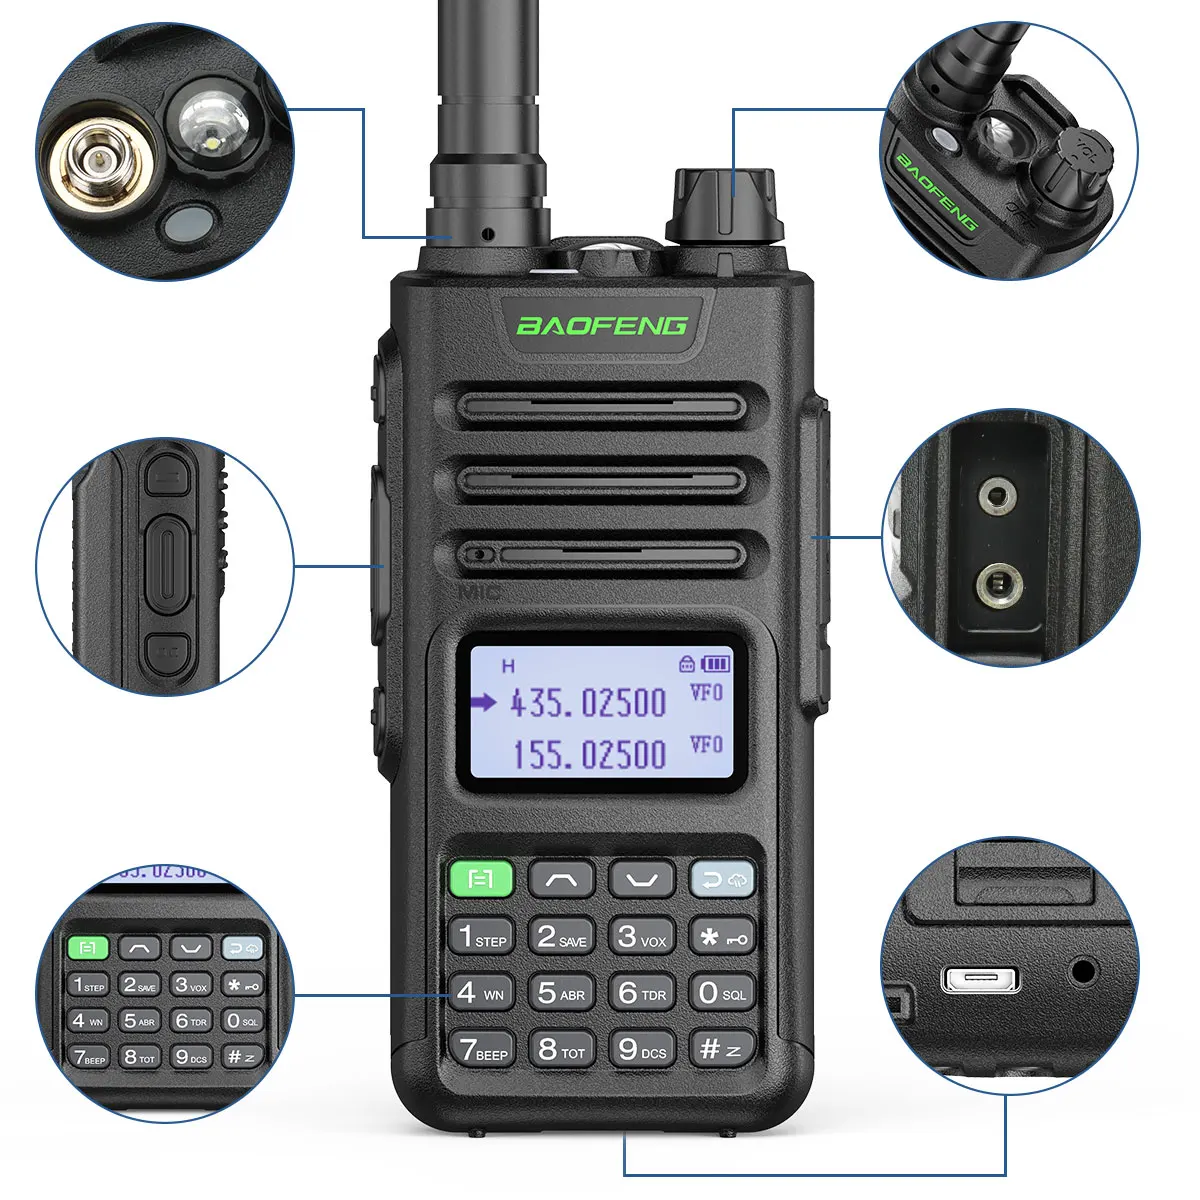 1pc 8w High Power Baofeng Walkie Talkie UV-5R Handheld Walkie Talkie With  Dual Band Dual Frequency (Uhf/Vhf), Outdoor Camping/Hiking/Fishing  Communication Device With Led Flashlight Function